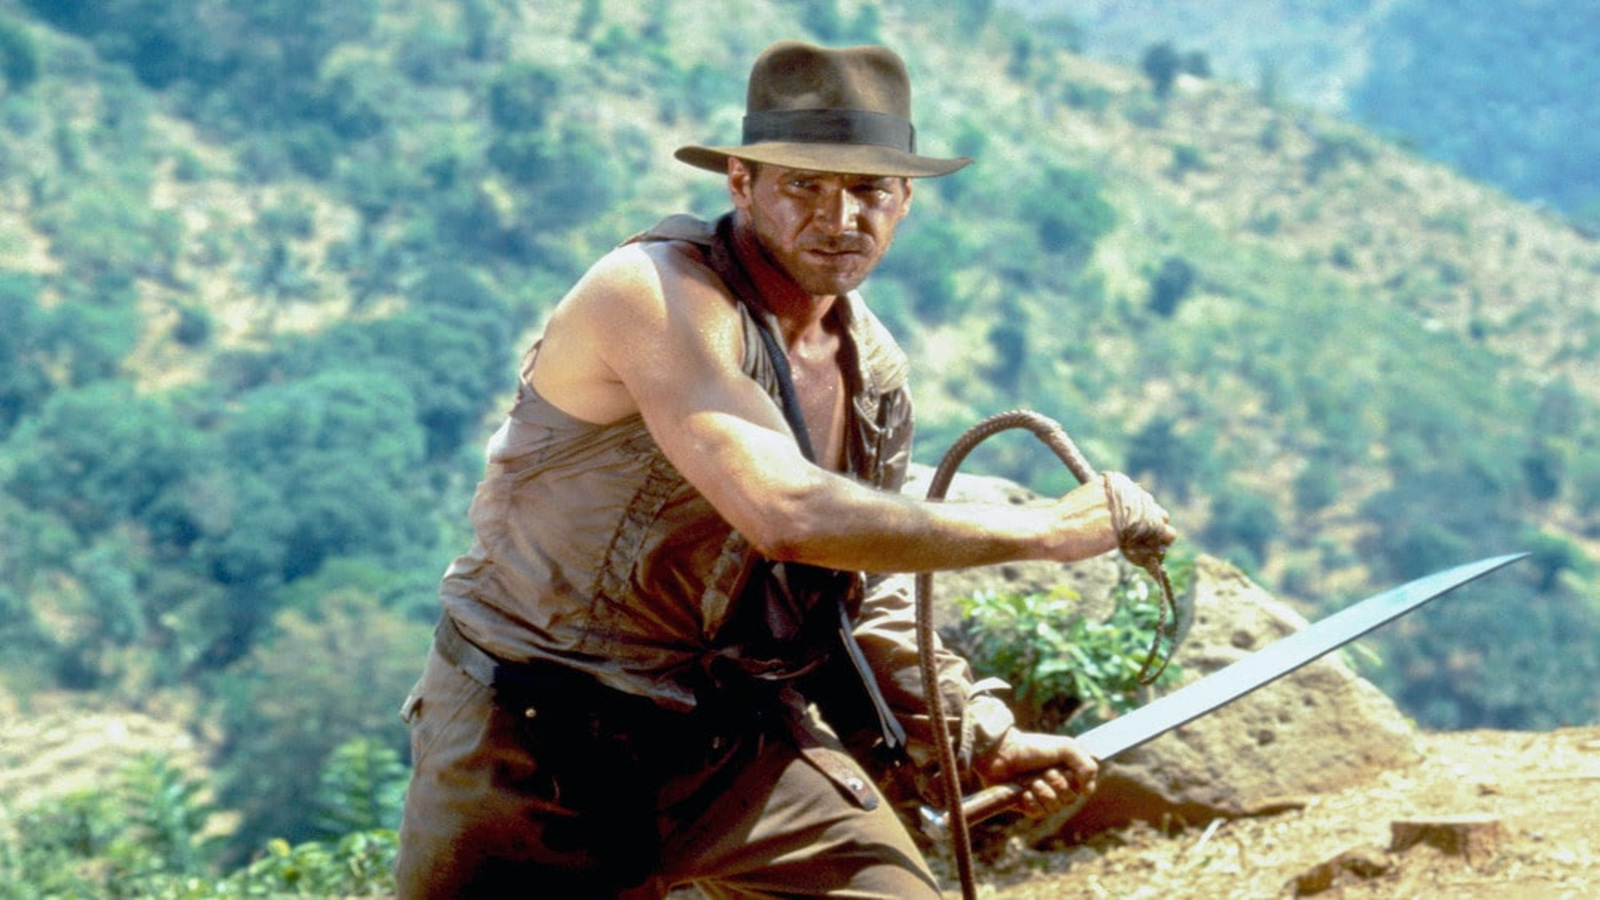 Indiana Jones: in search of the lost saga, arriving on Arte.Tv from May 19th